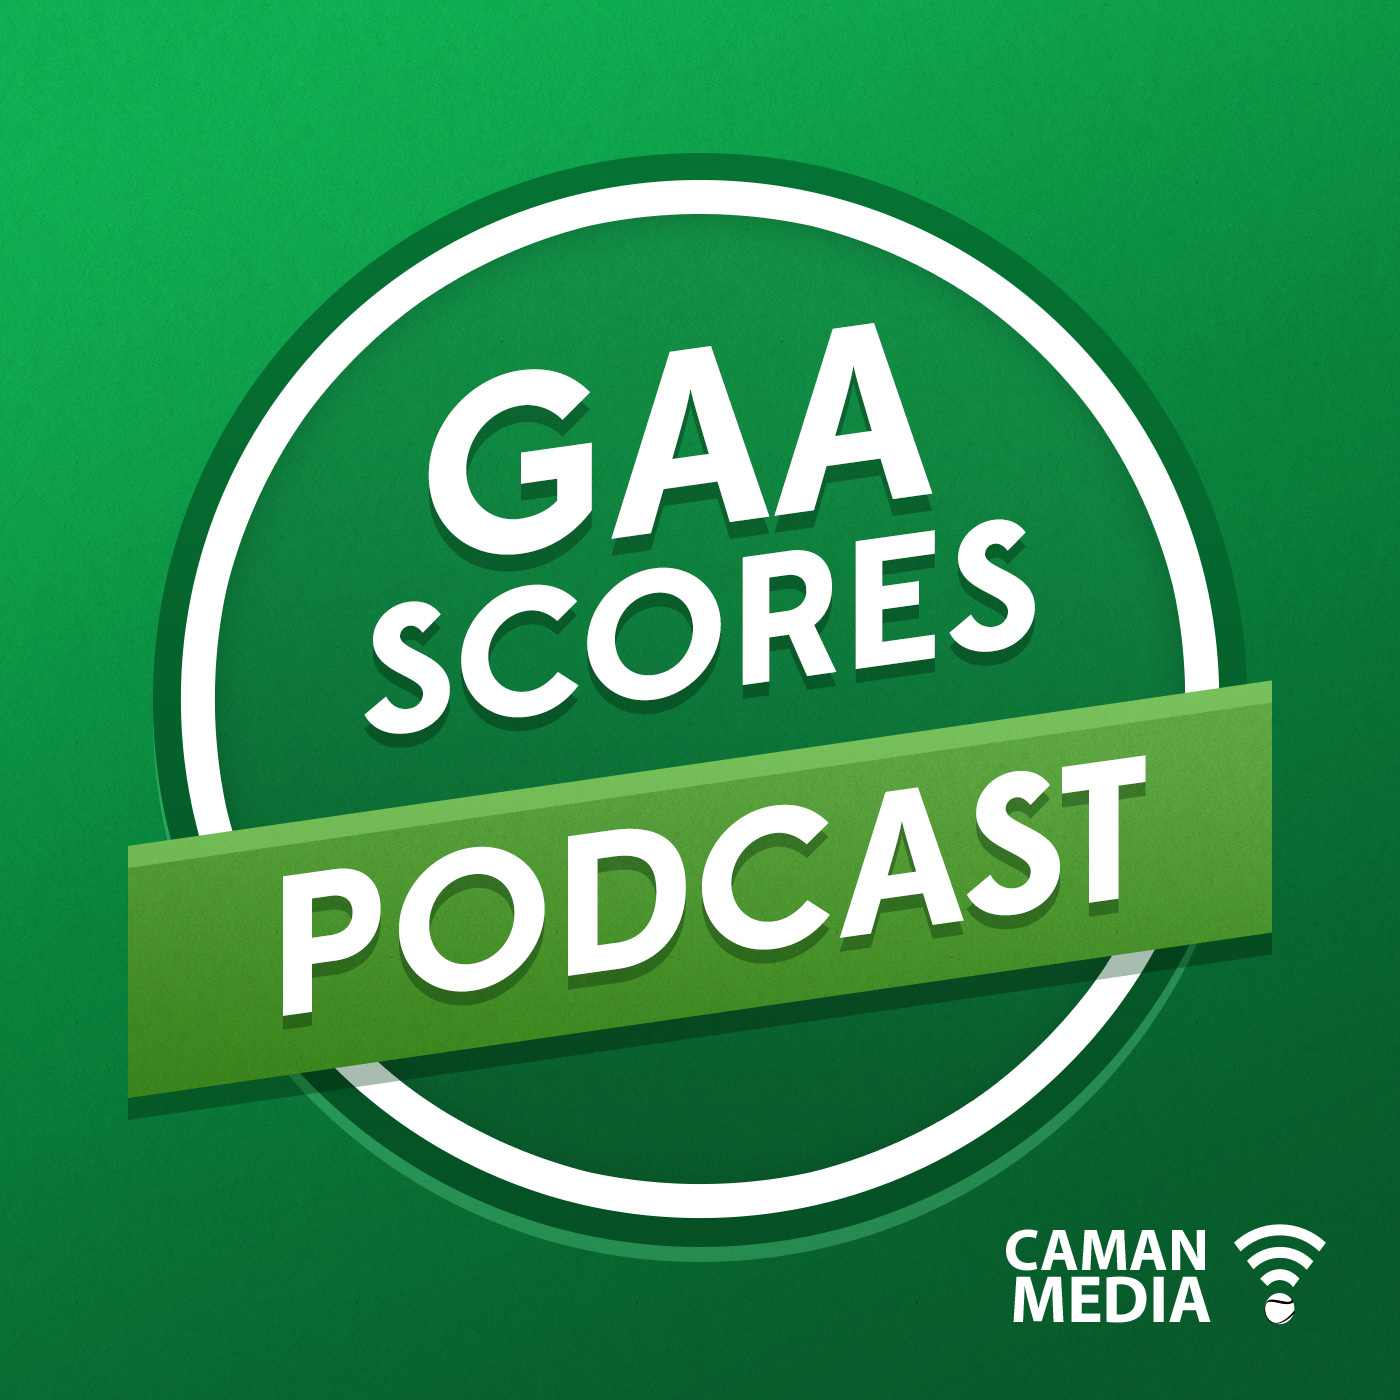 #83 – Conor Coyle on East Belfast GAA and Covid restrictions in the GAA